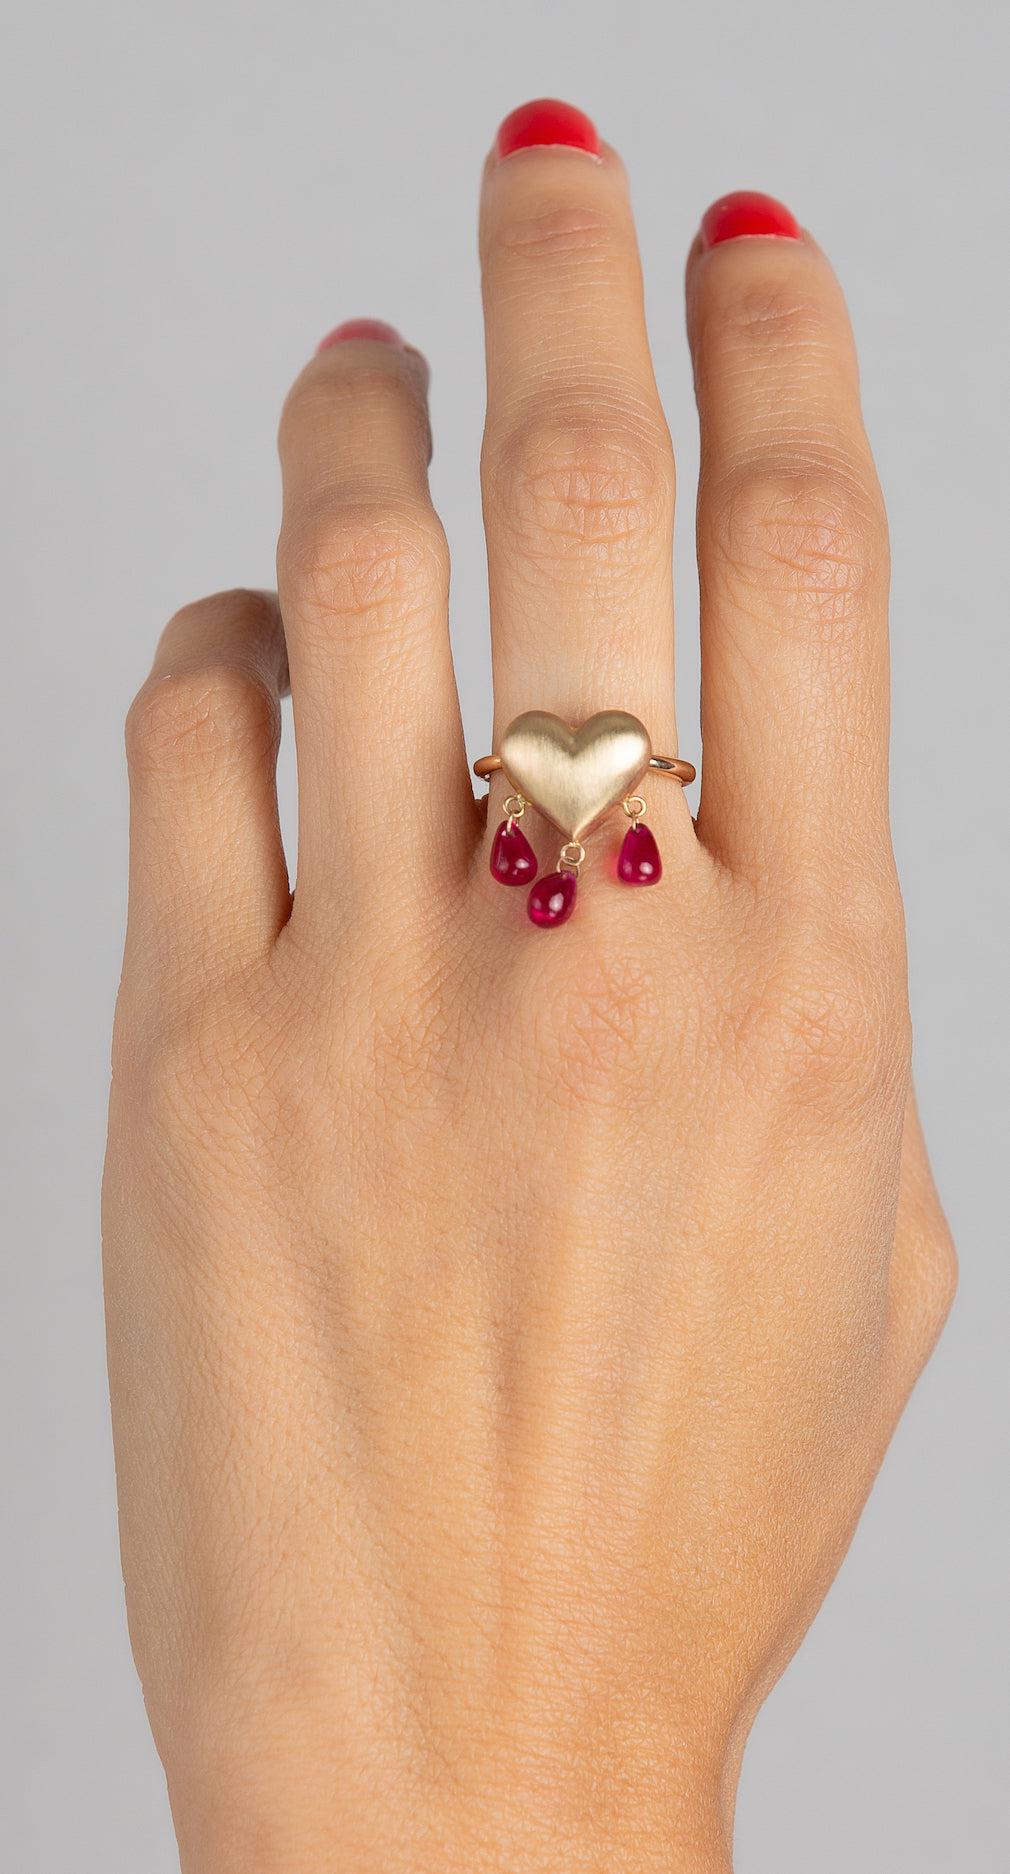 14k gold puffy heart ring with 3 ruby droplets dangling from heart on model hand